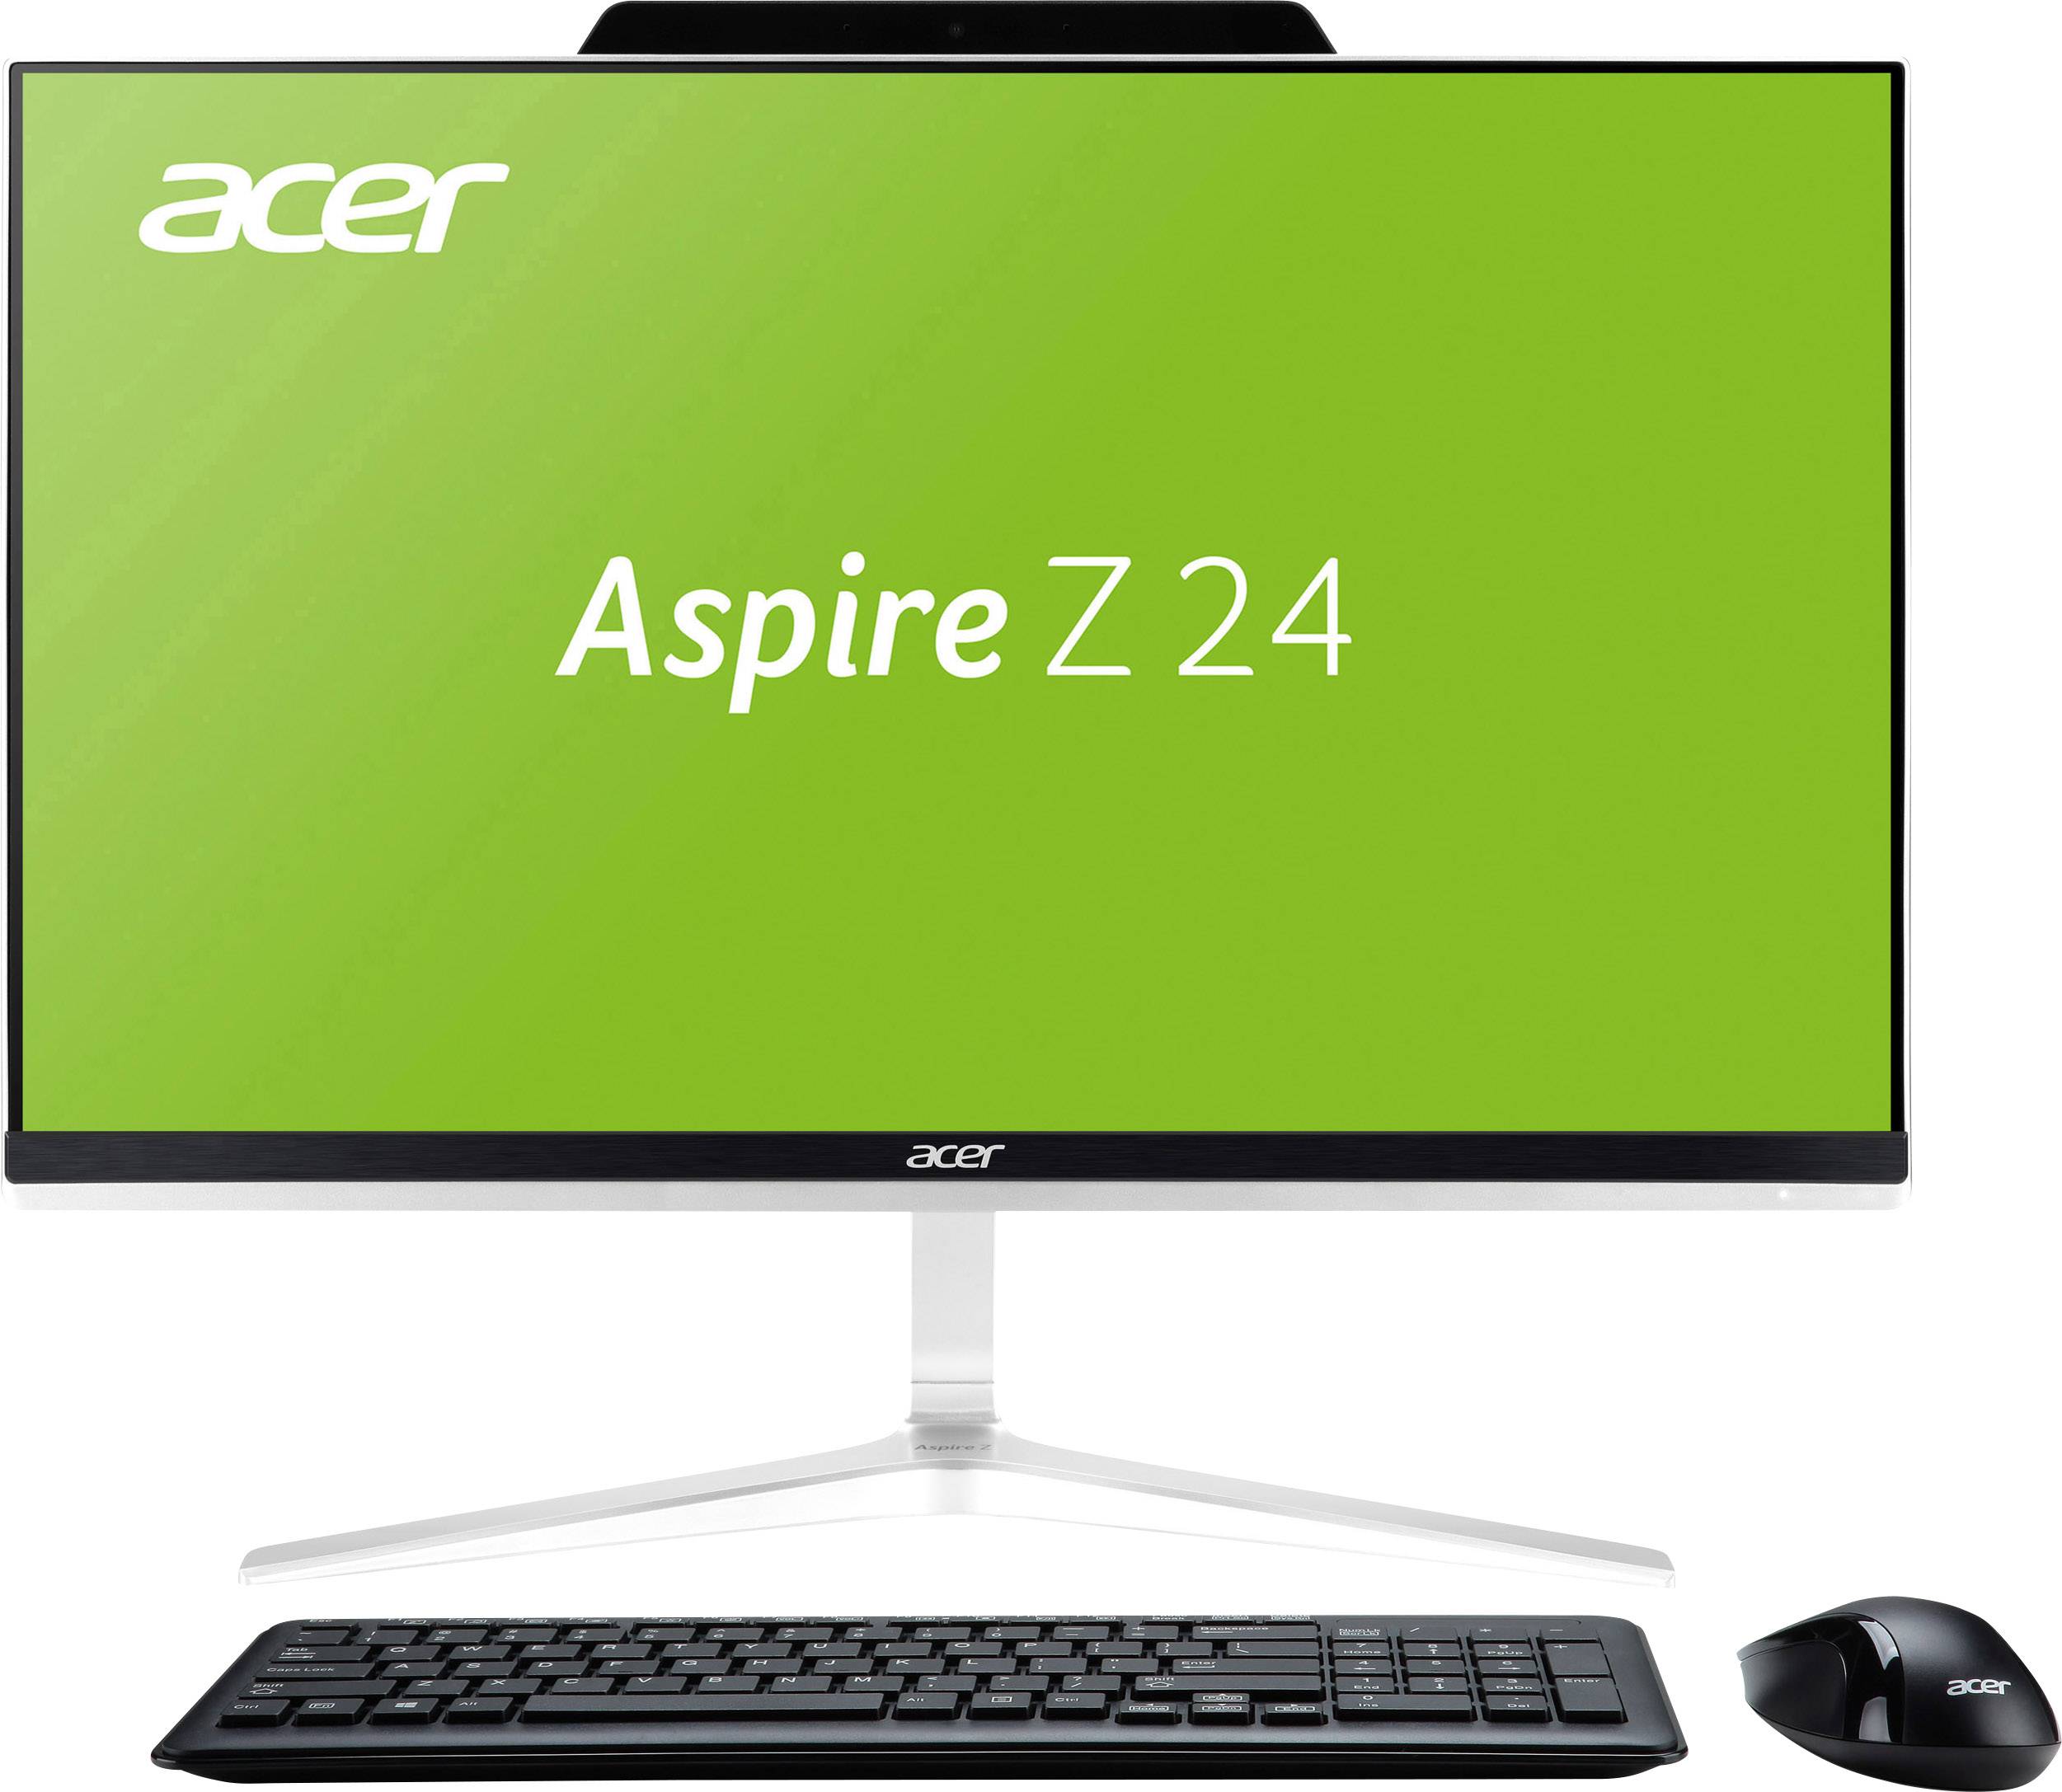 Aspire 24. Acer Aspire zs600. Aspire z2770. Acer all1917. Acer all in one.